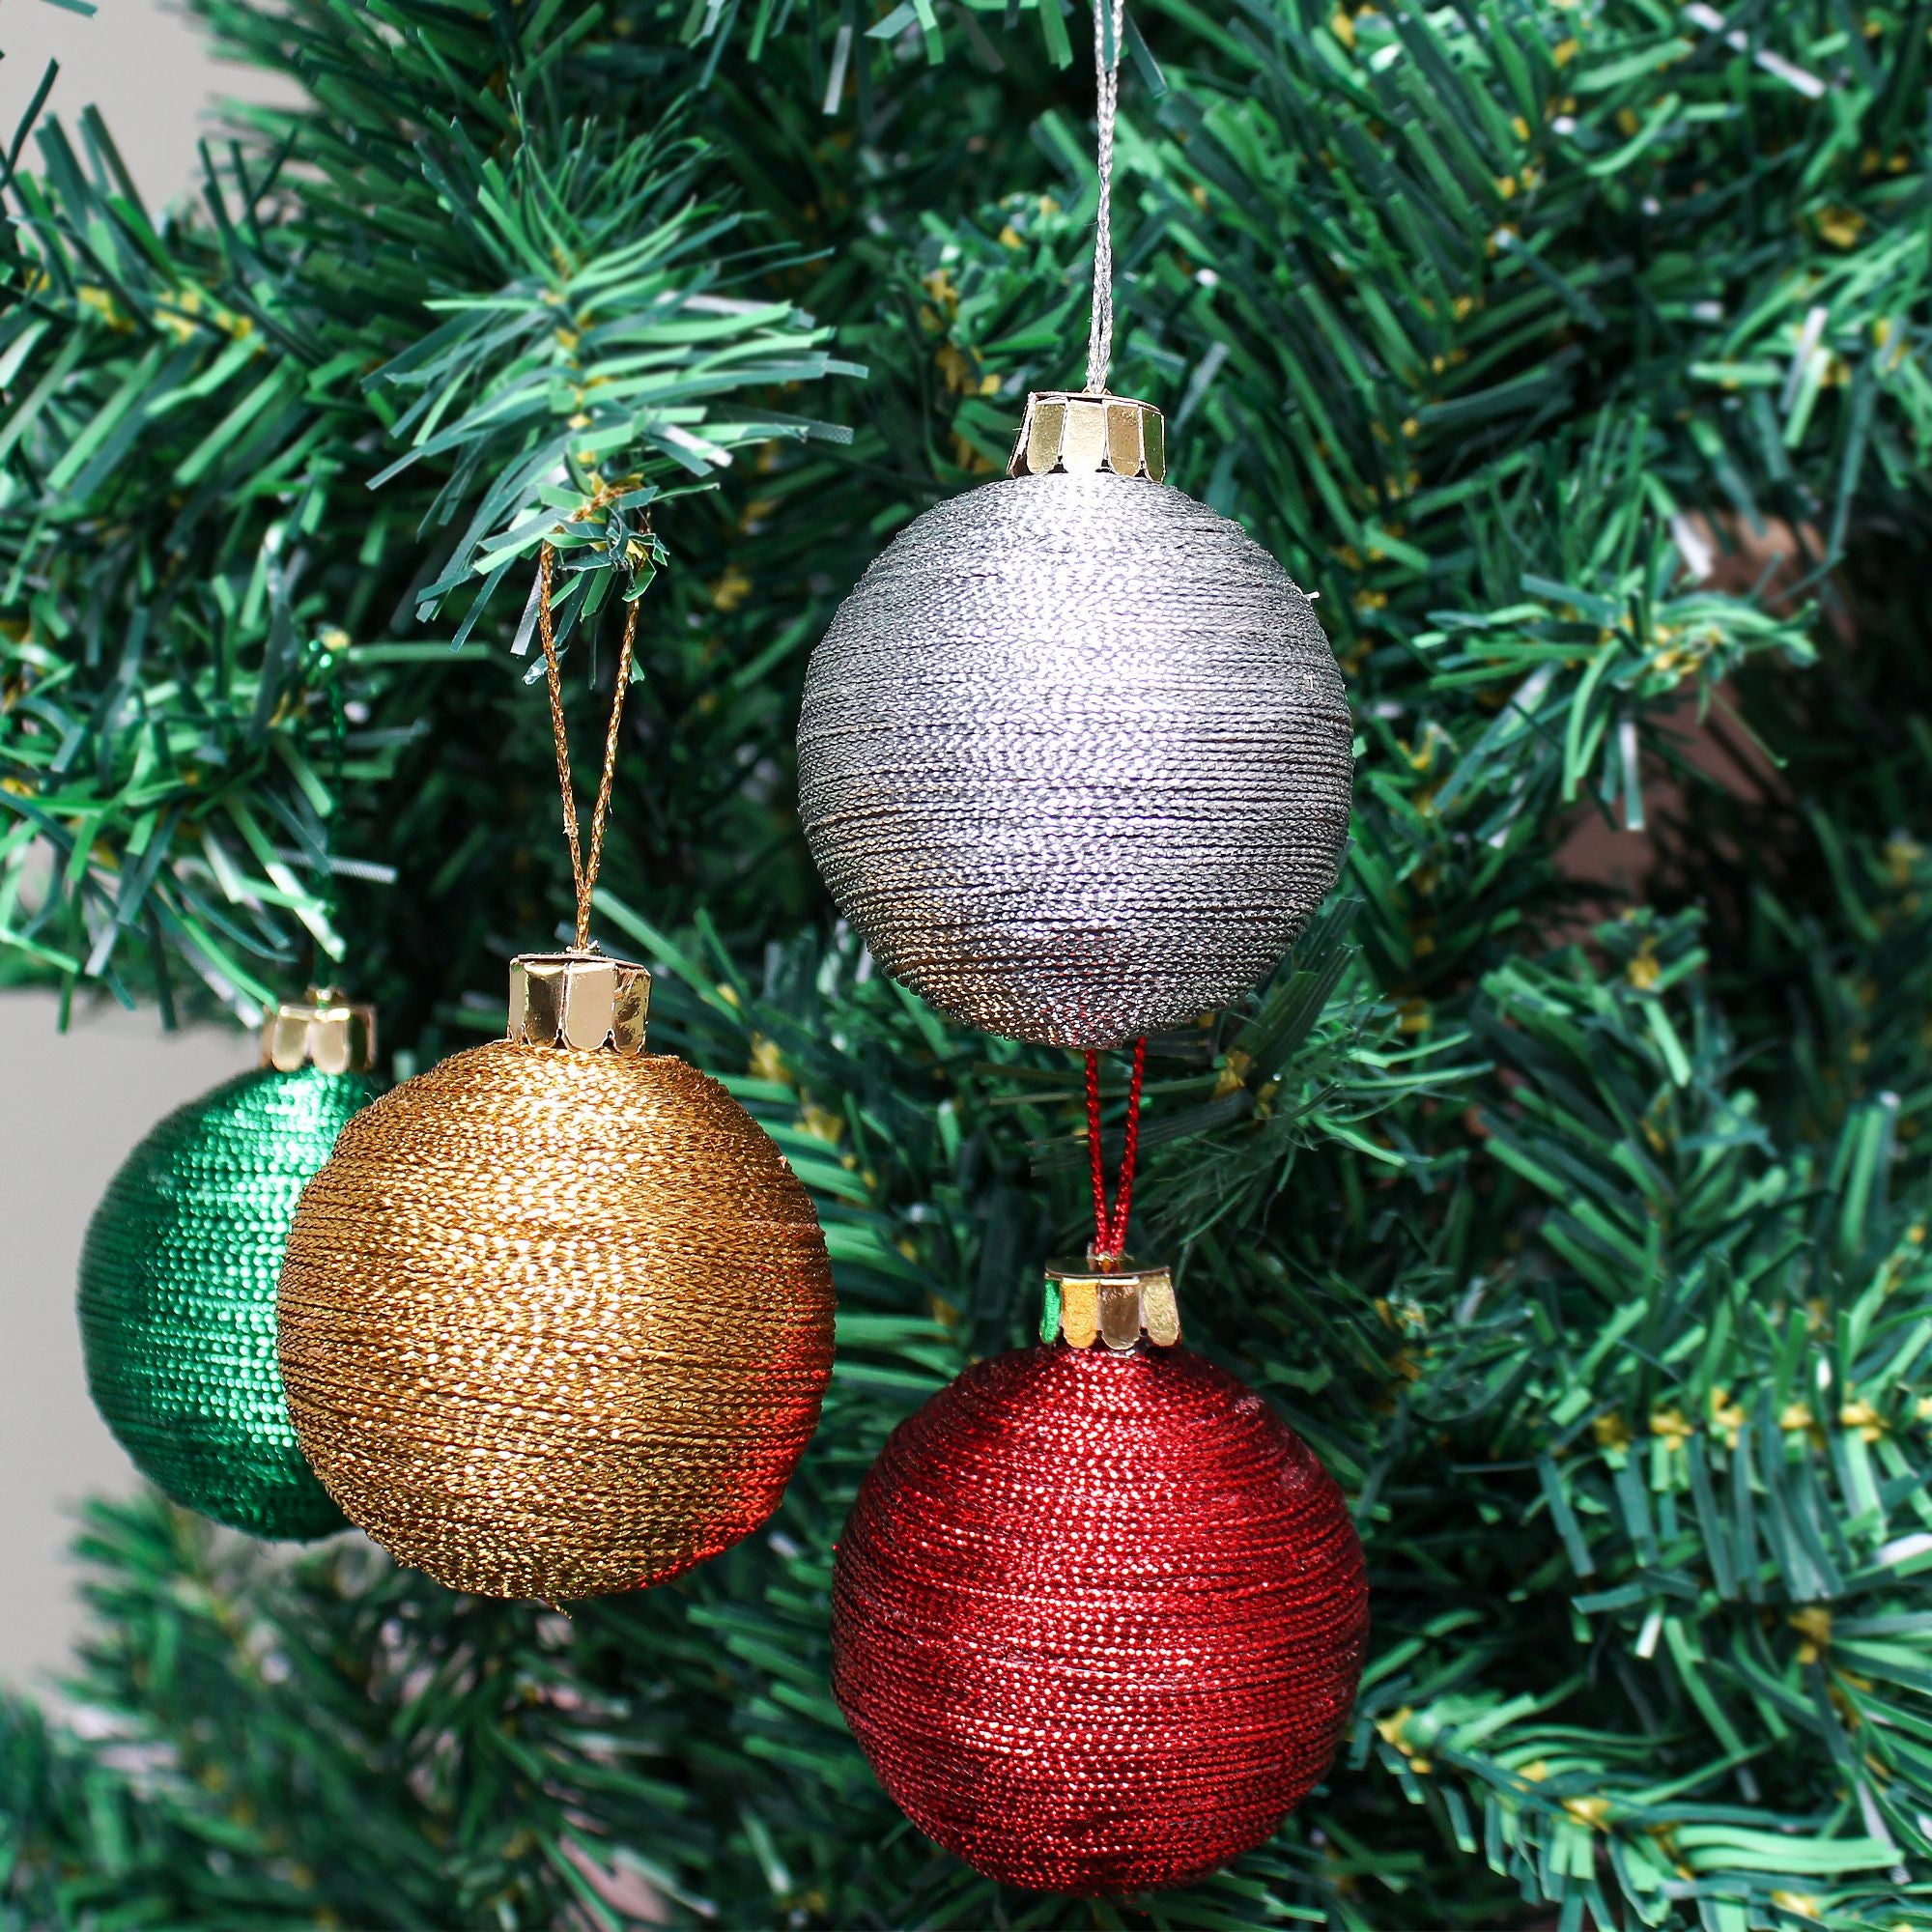 Handmade Christmas Ornaments - Lurex Baubles, 50mm, Assorted Colours - Red, Green, Gold, Silver, 4pc